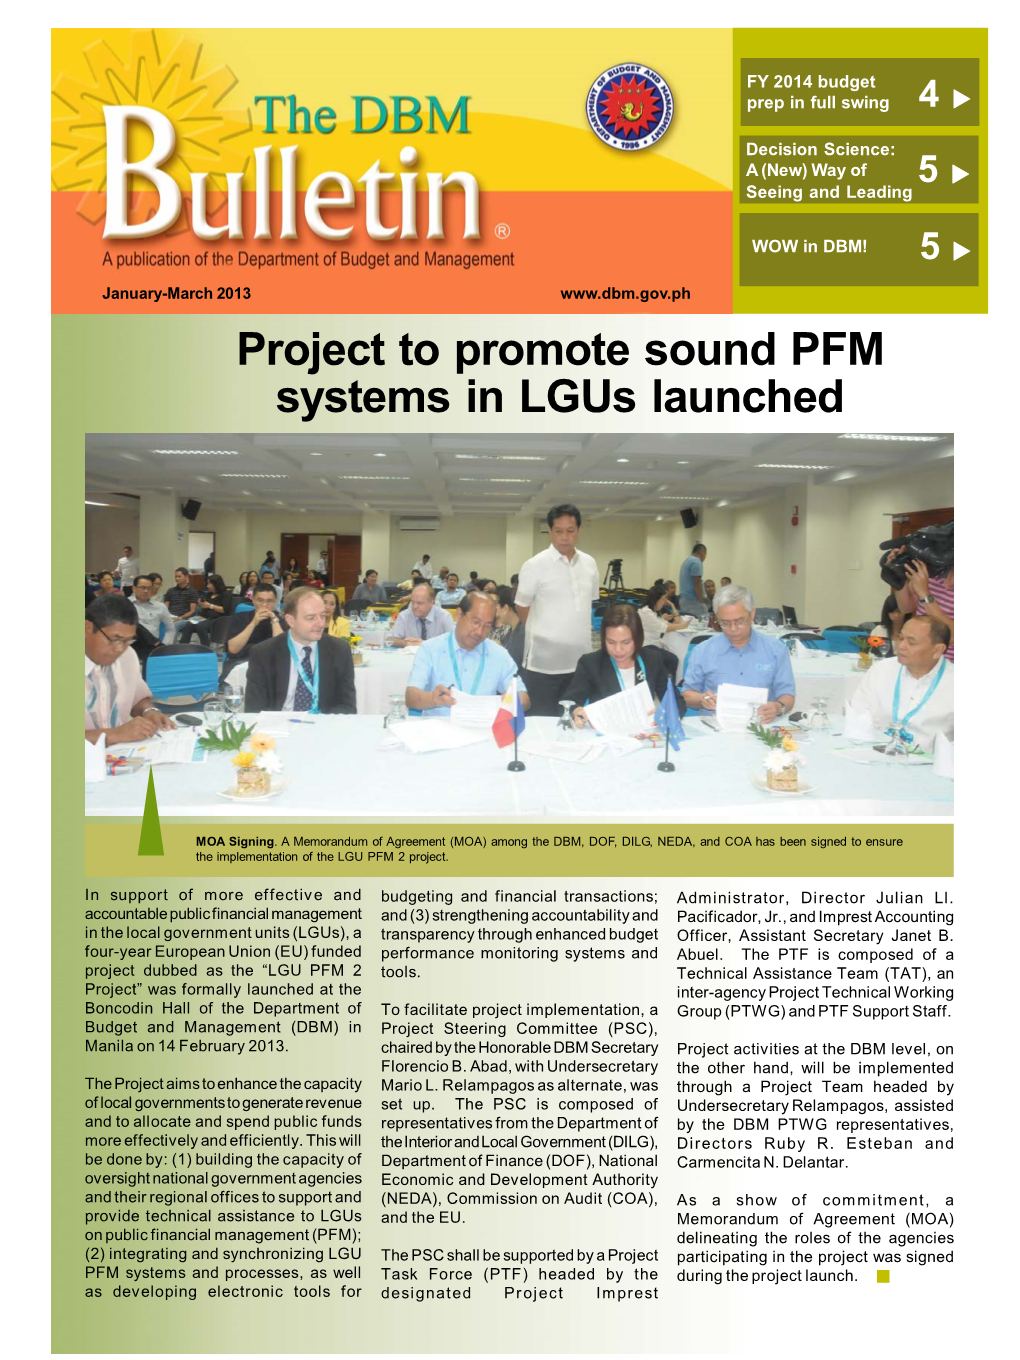 Project to Promote Sound PFM Systems in Lgus Launched